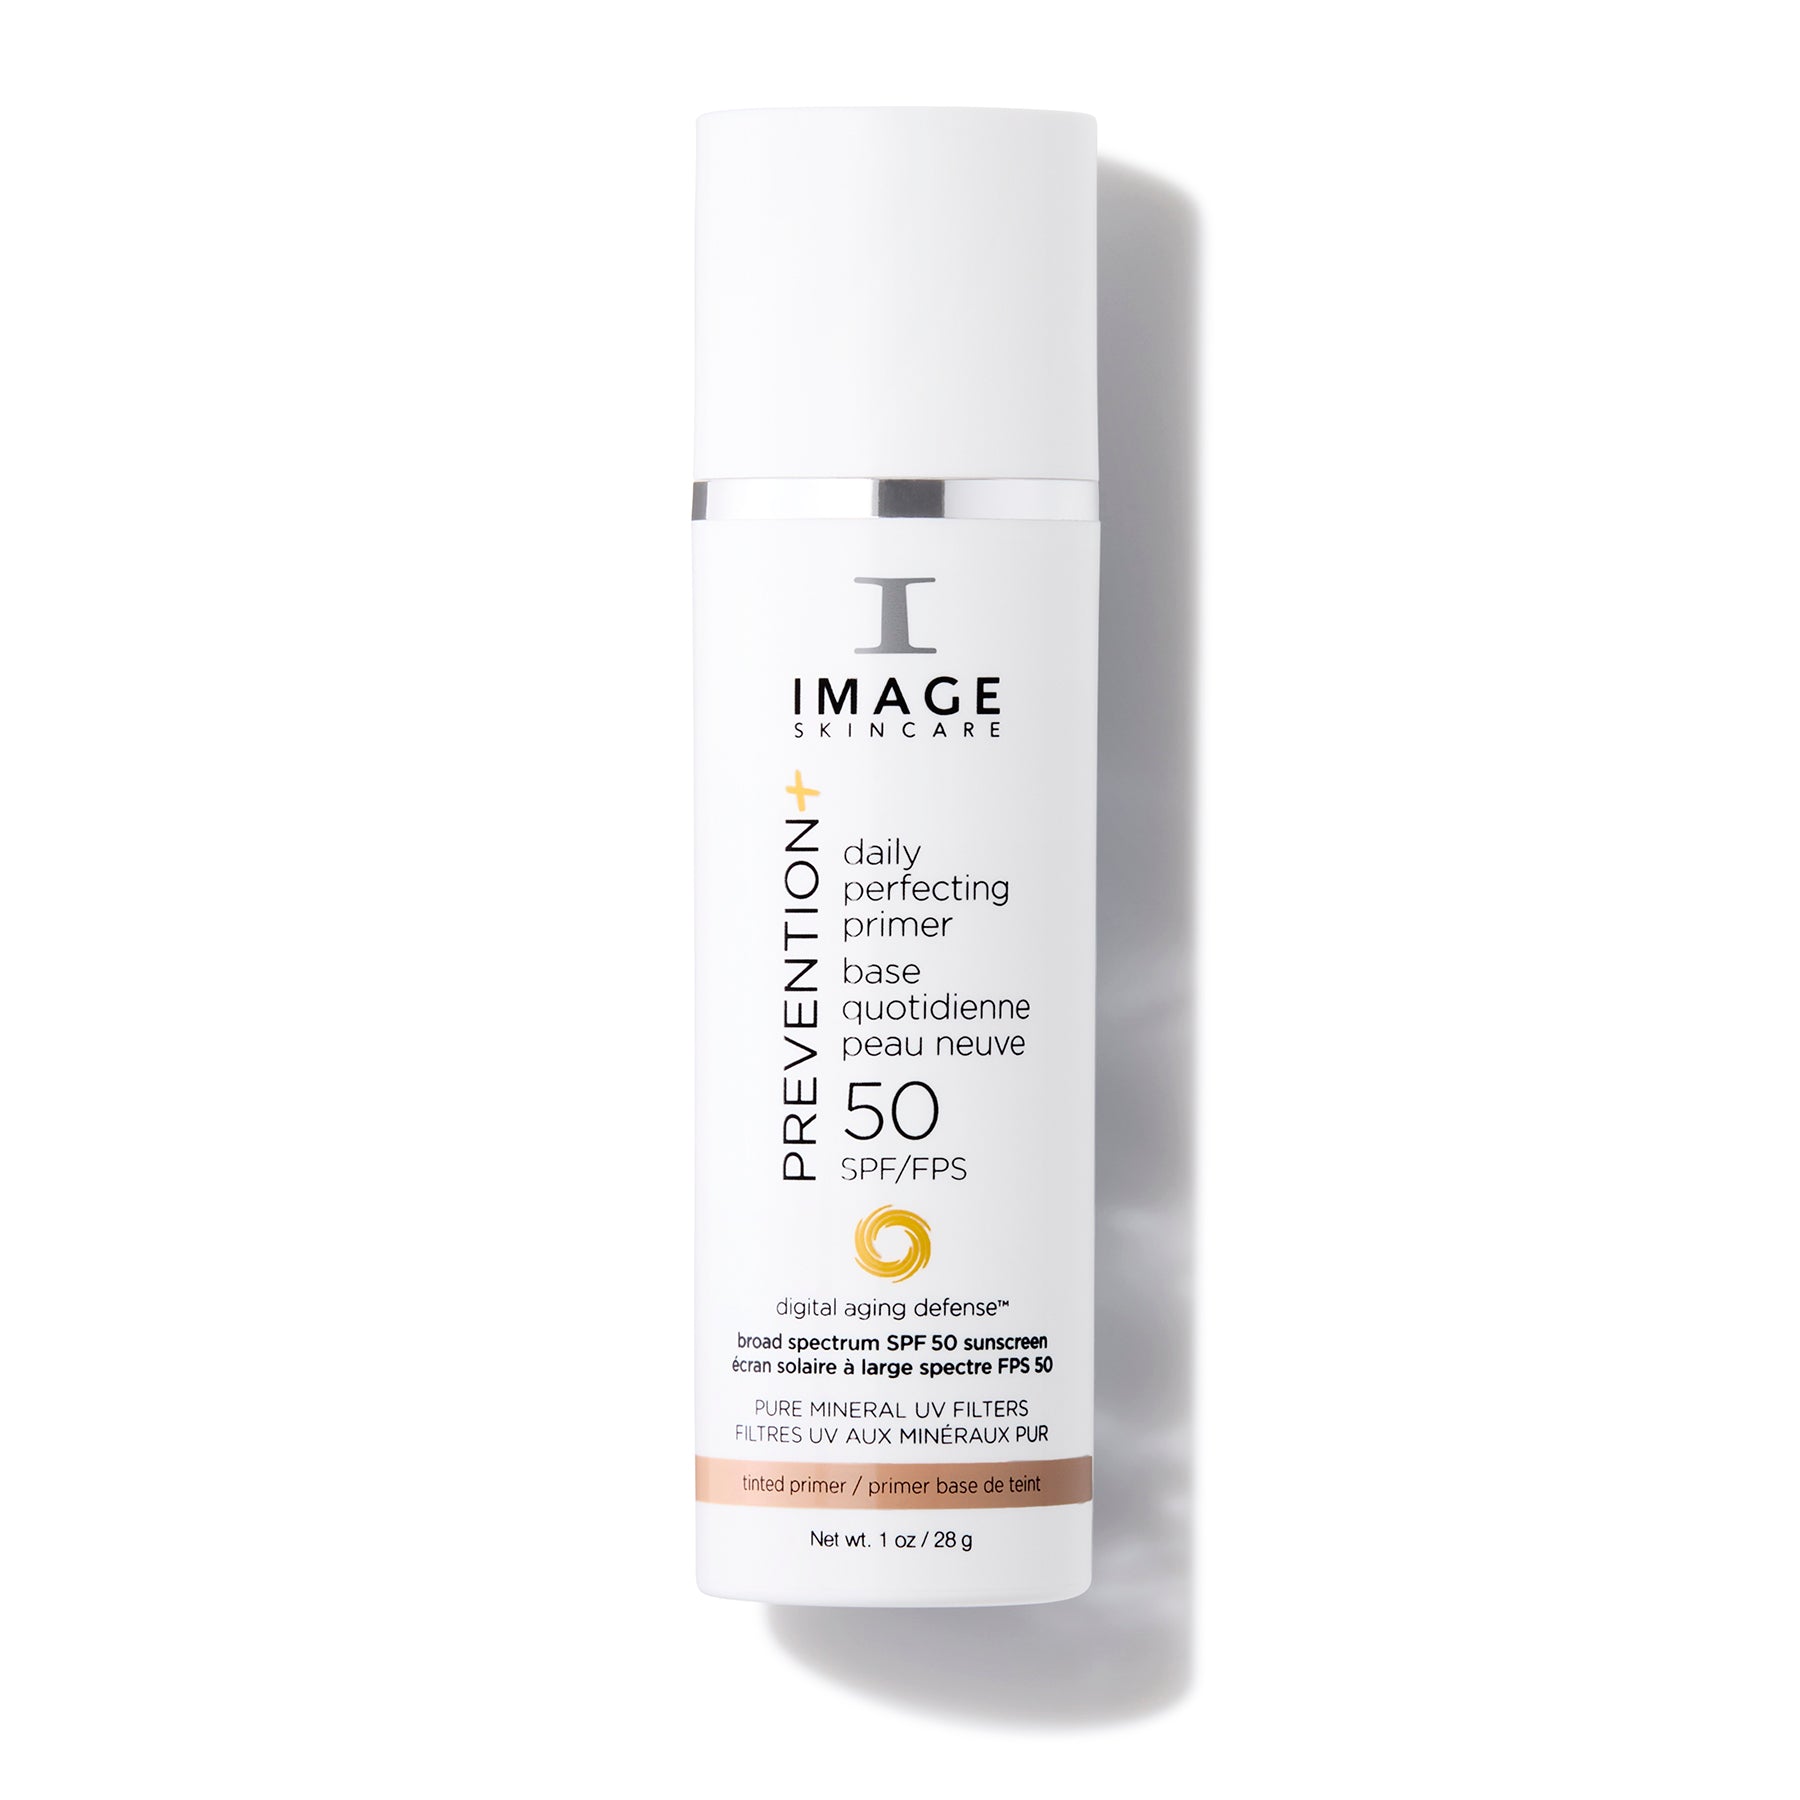 IMAGE Skincare Prevention Daily Perfecting Primer